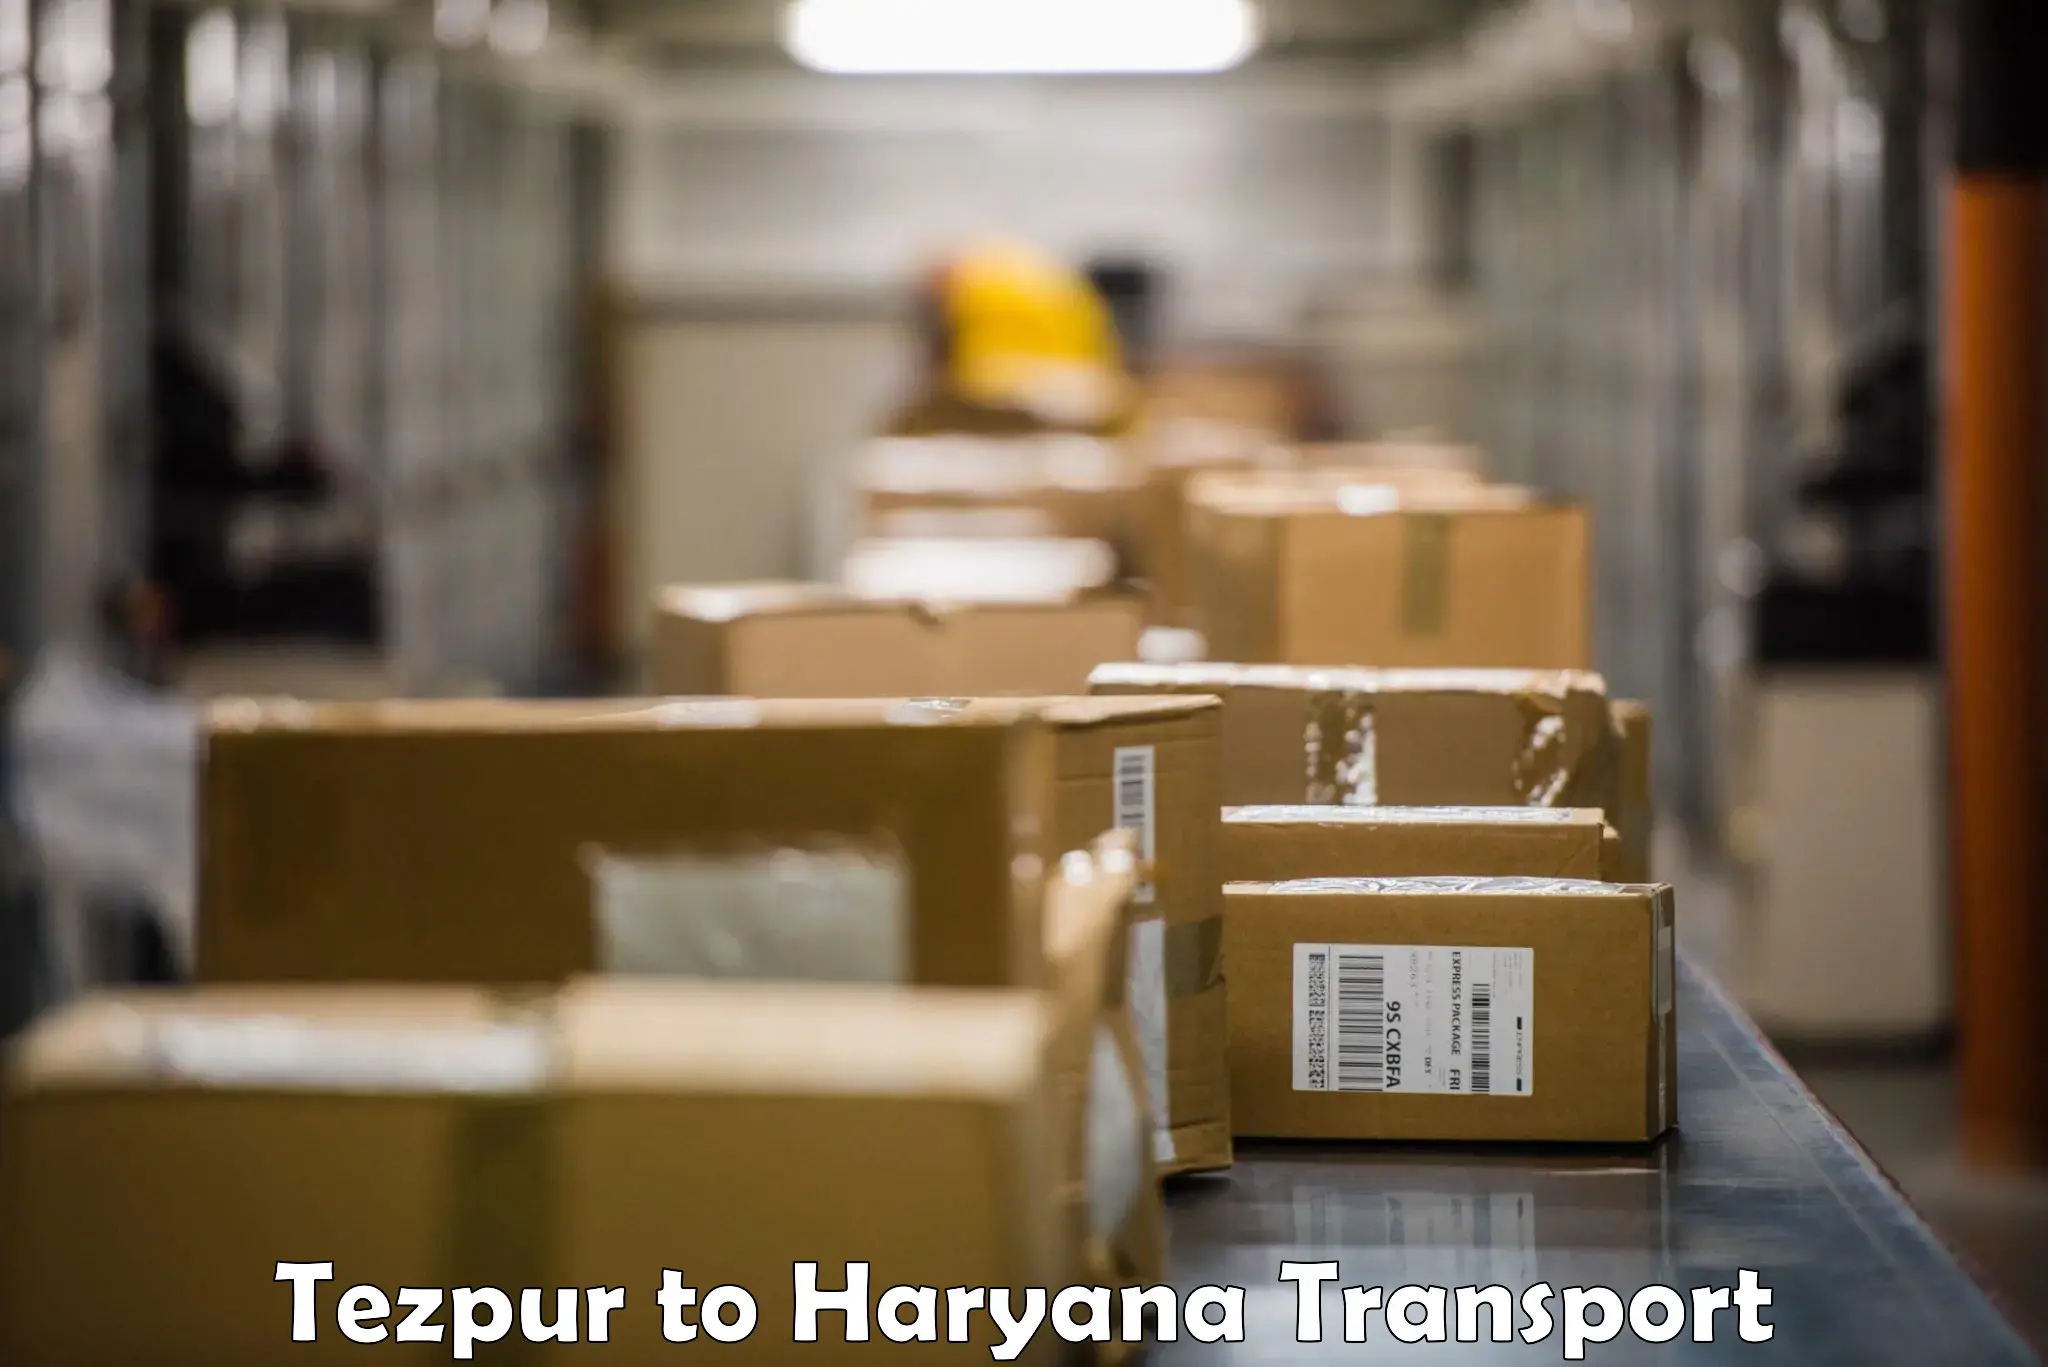 Online transport booking Tezpur to Chaudhary Charan Singh Haryana Agricultural University Hisar